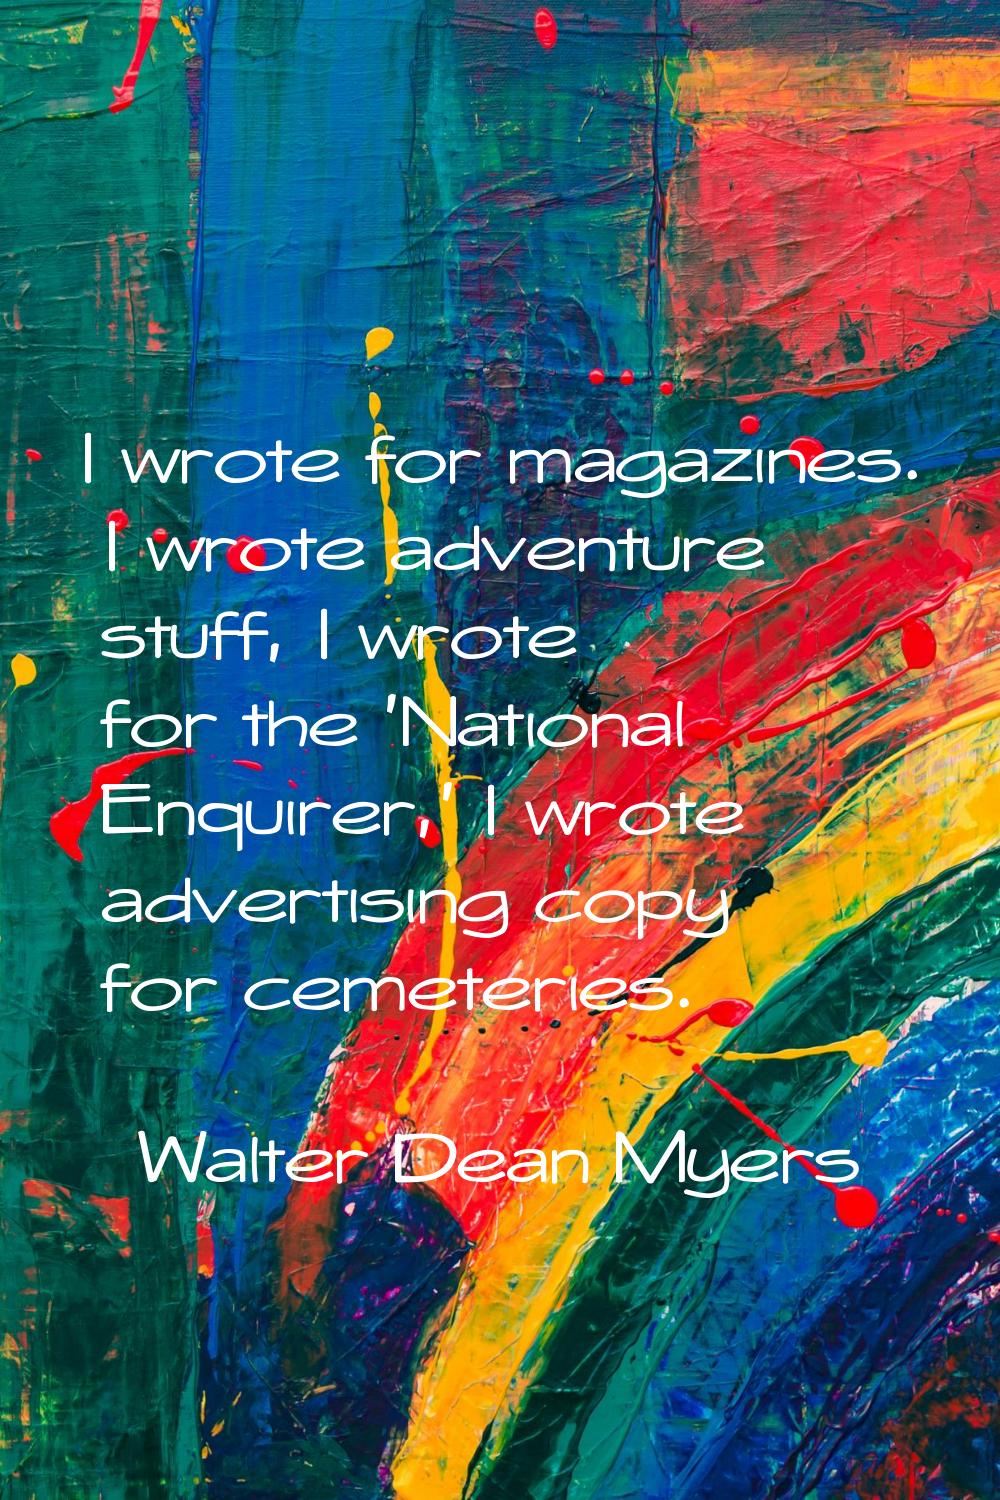 I wrote for magazines. I wrote adventure stuff, I wrote for the 'National Enquirer,' I wrote advert